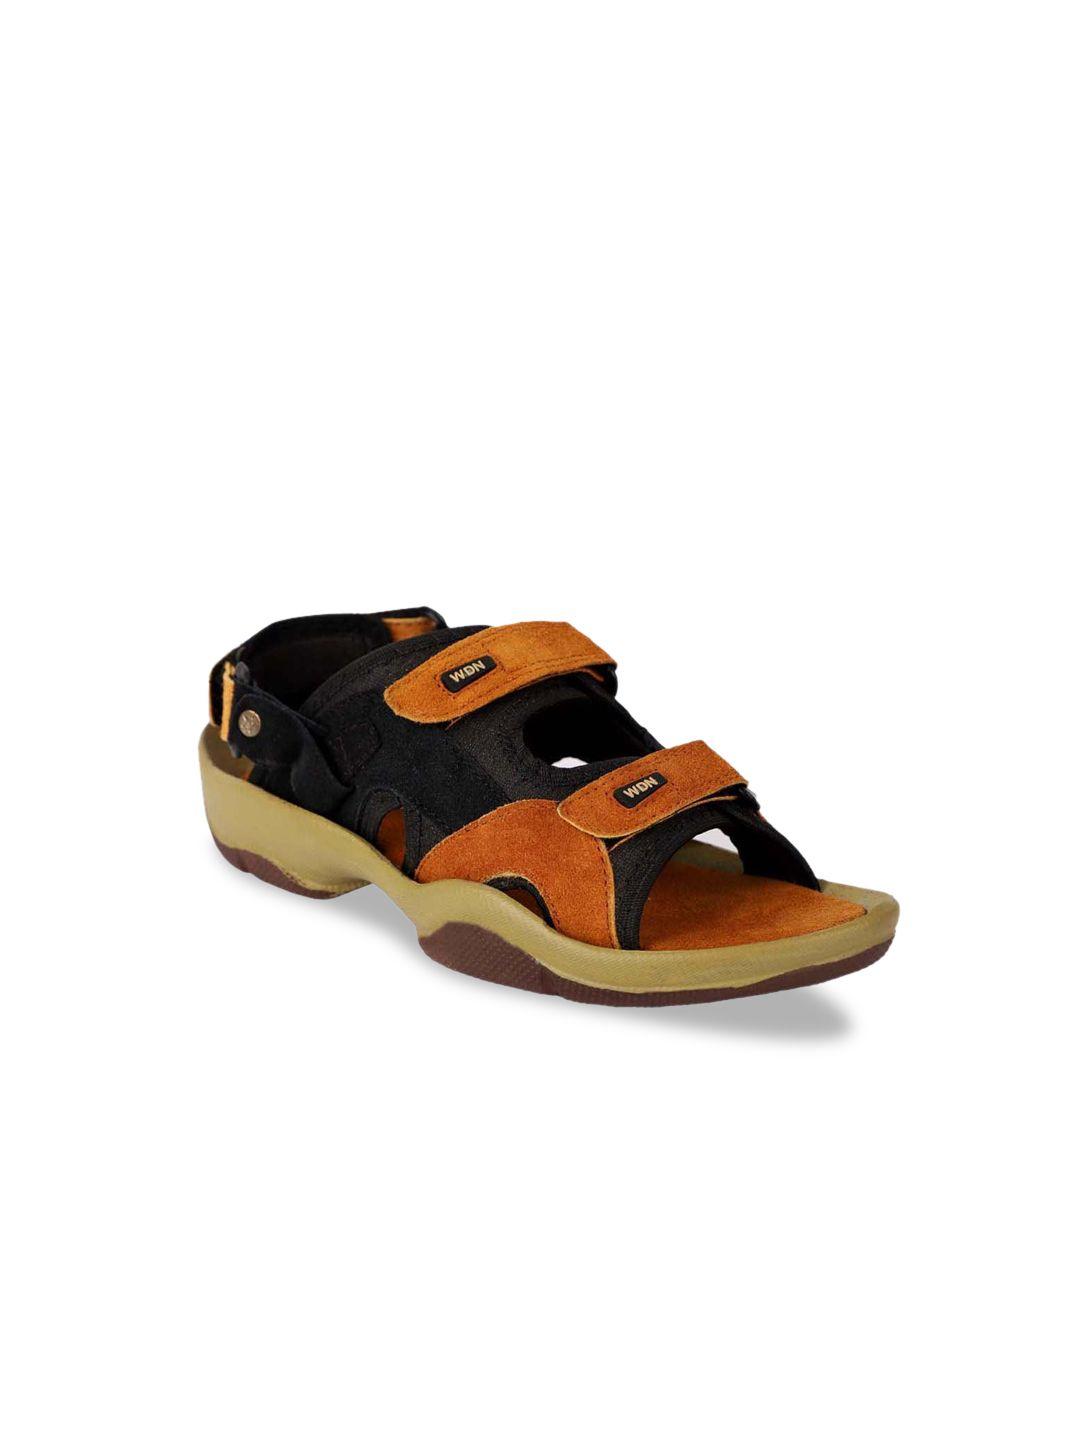 woakers men tan brown & black colourblocked leather sports sandals